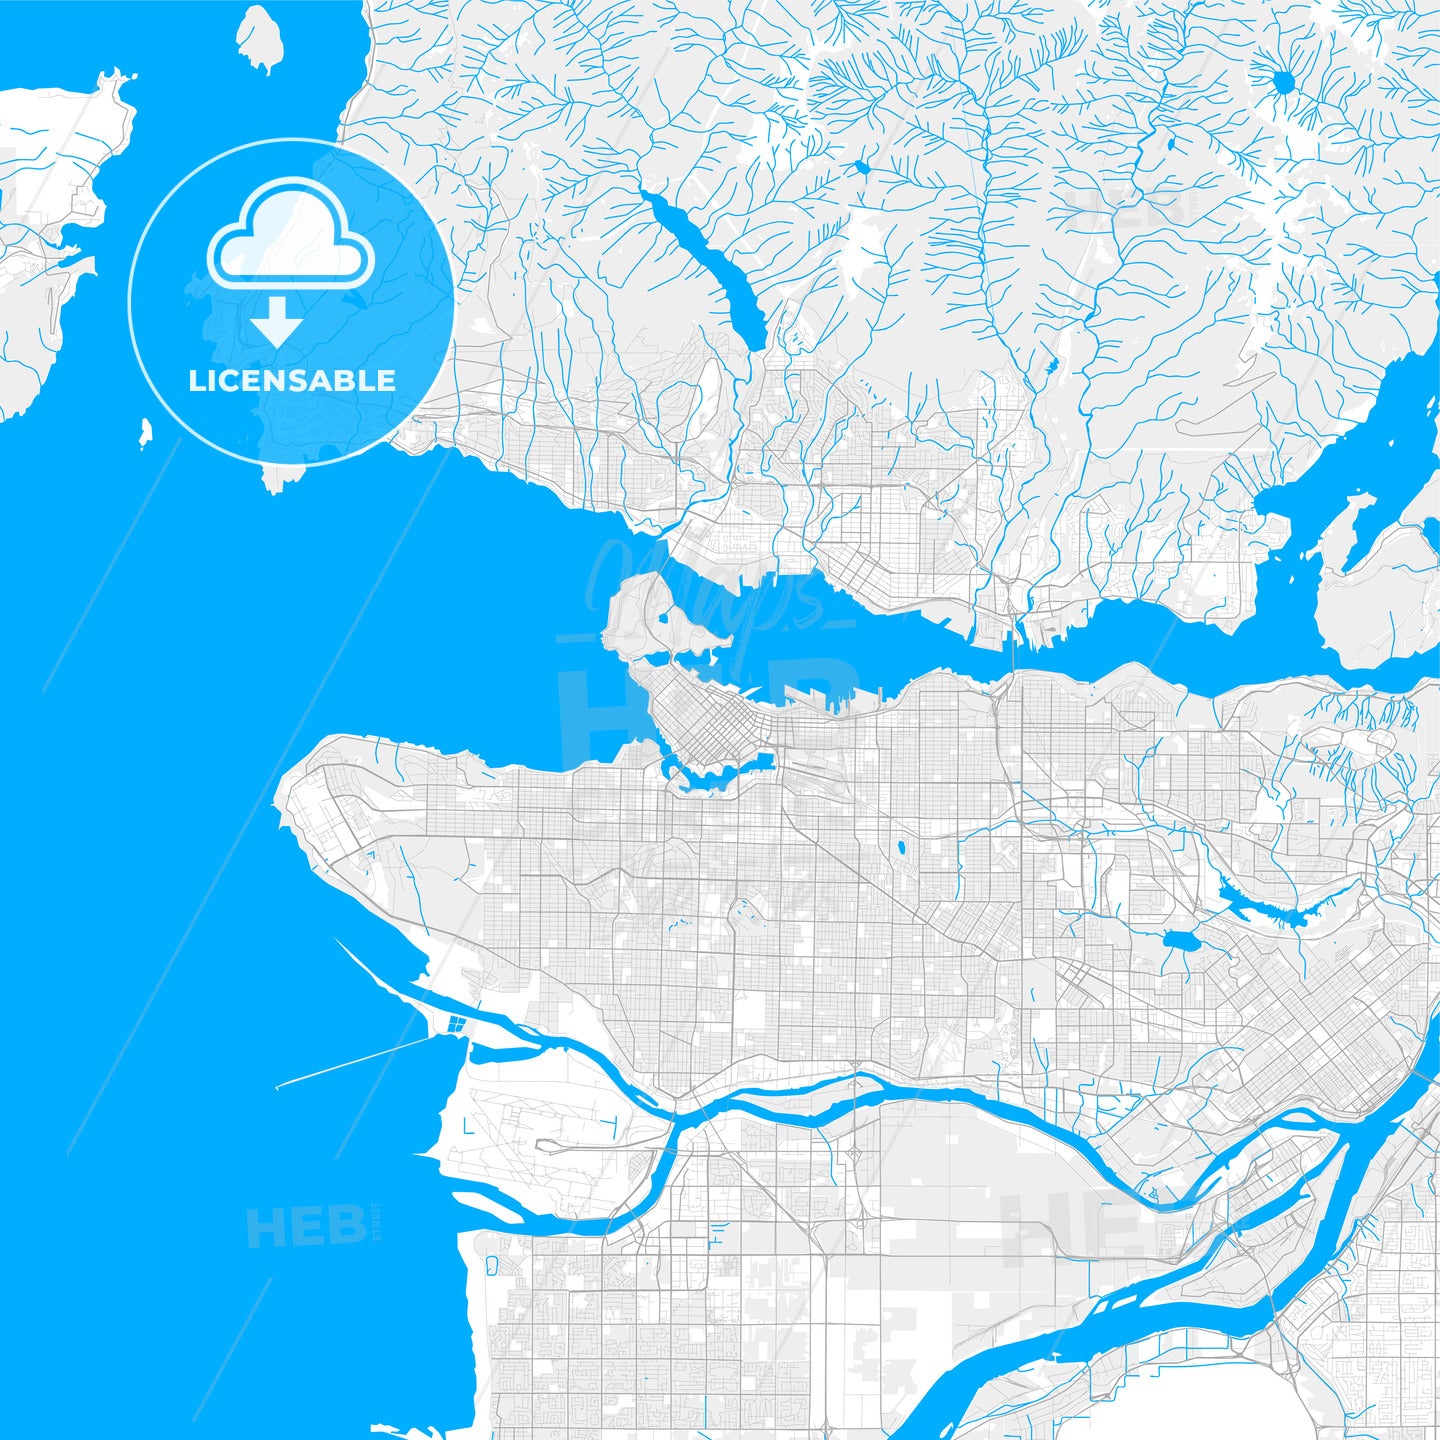 Rich detailed vector map of Vancouver, British Columbia, Canada